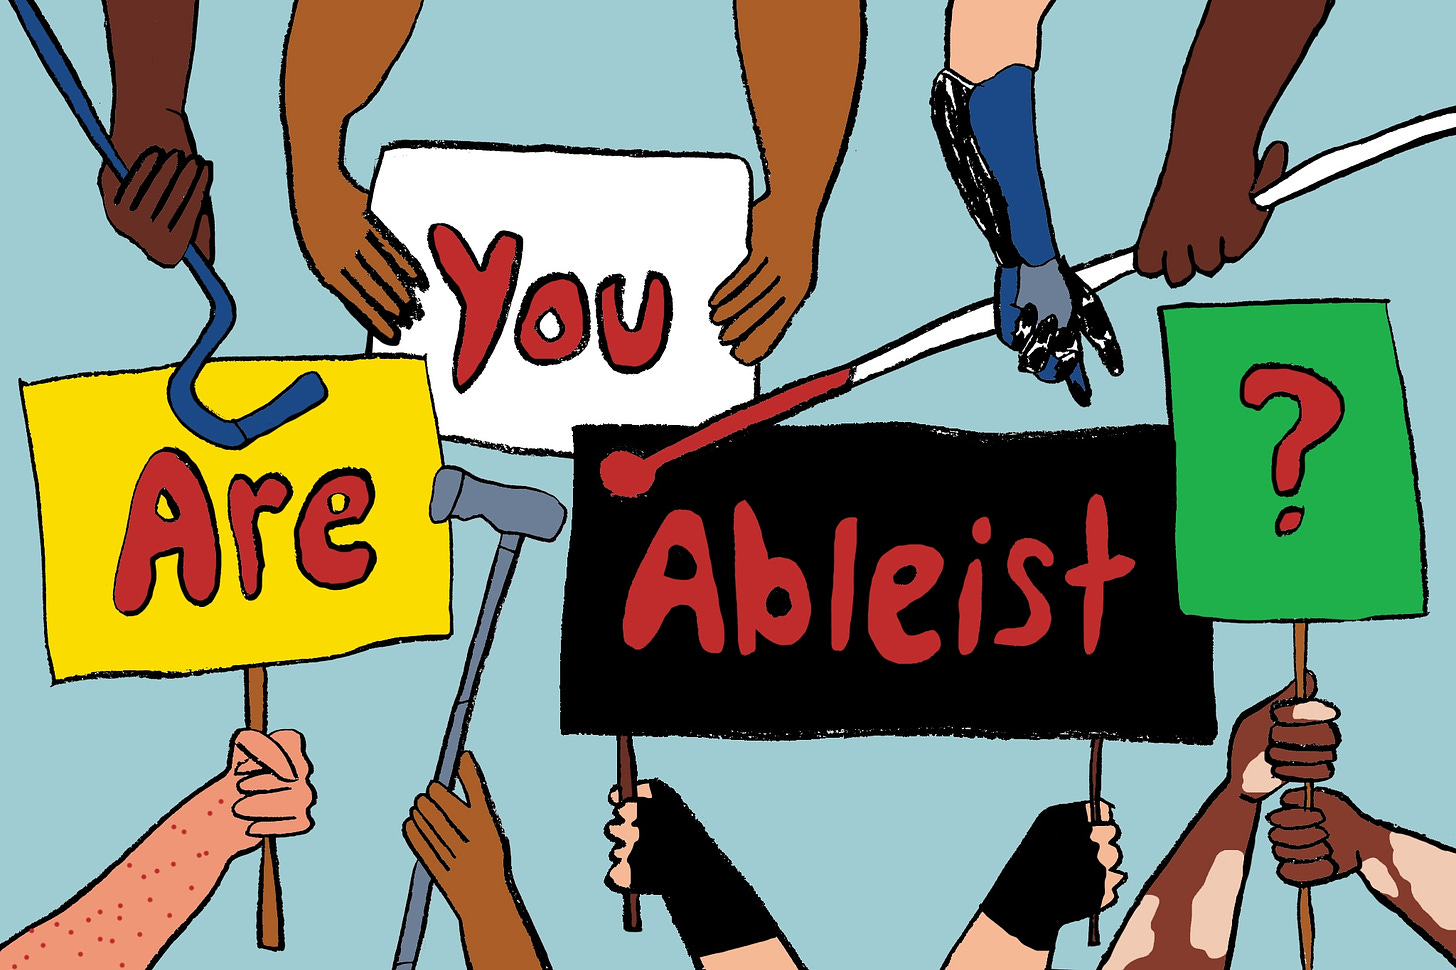 Different signs are put forward by different kinds of disabled hands. Together, the signs ask “Are You Ableist?”